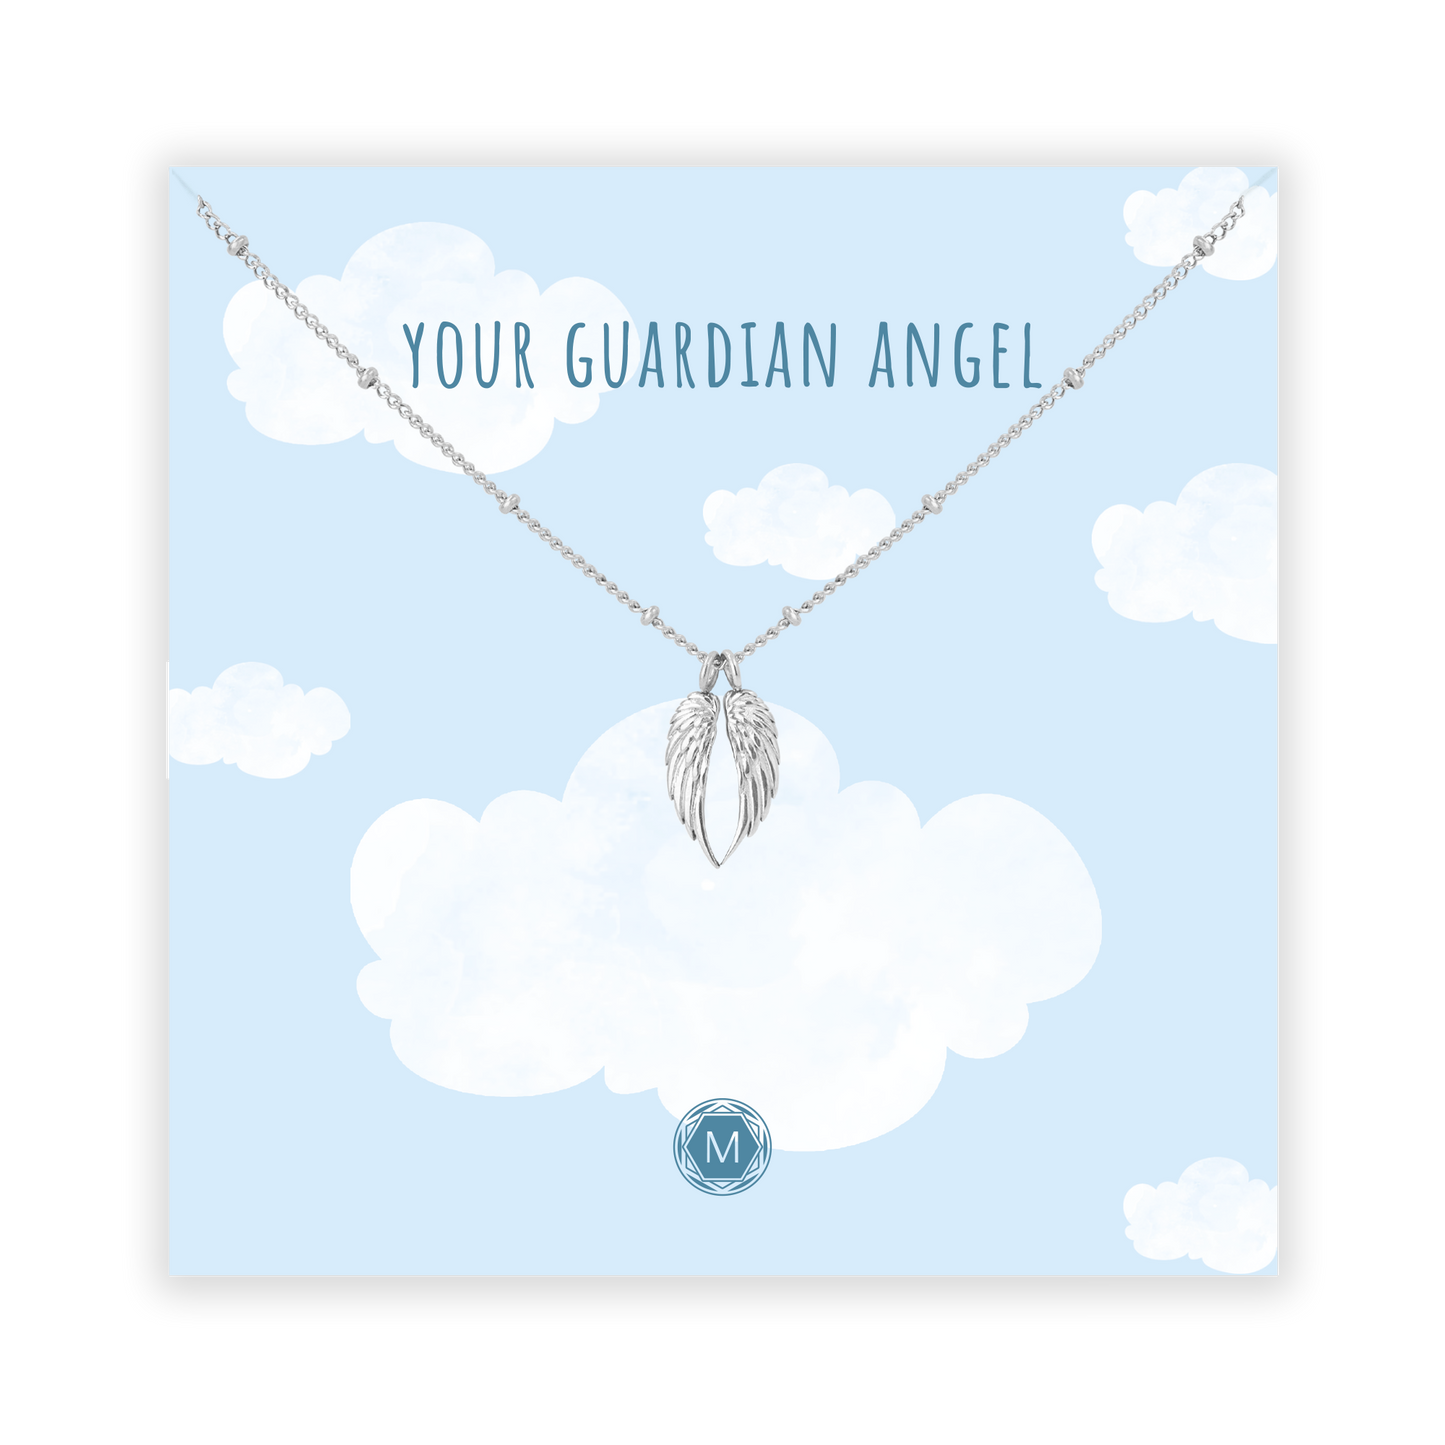 YOUR GUARDIAN ANGEL Necklace